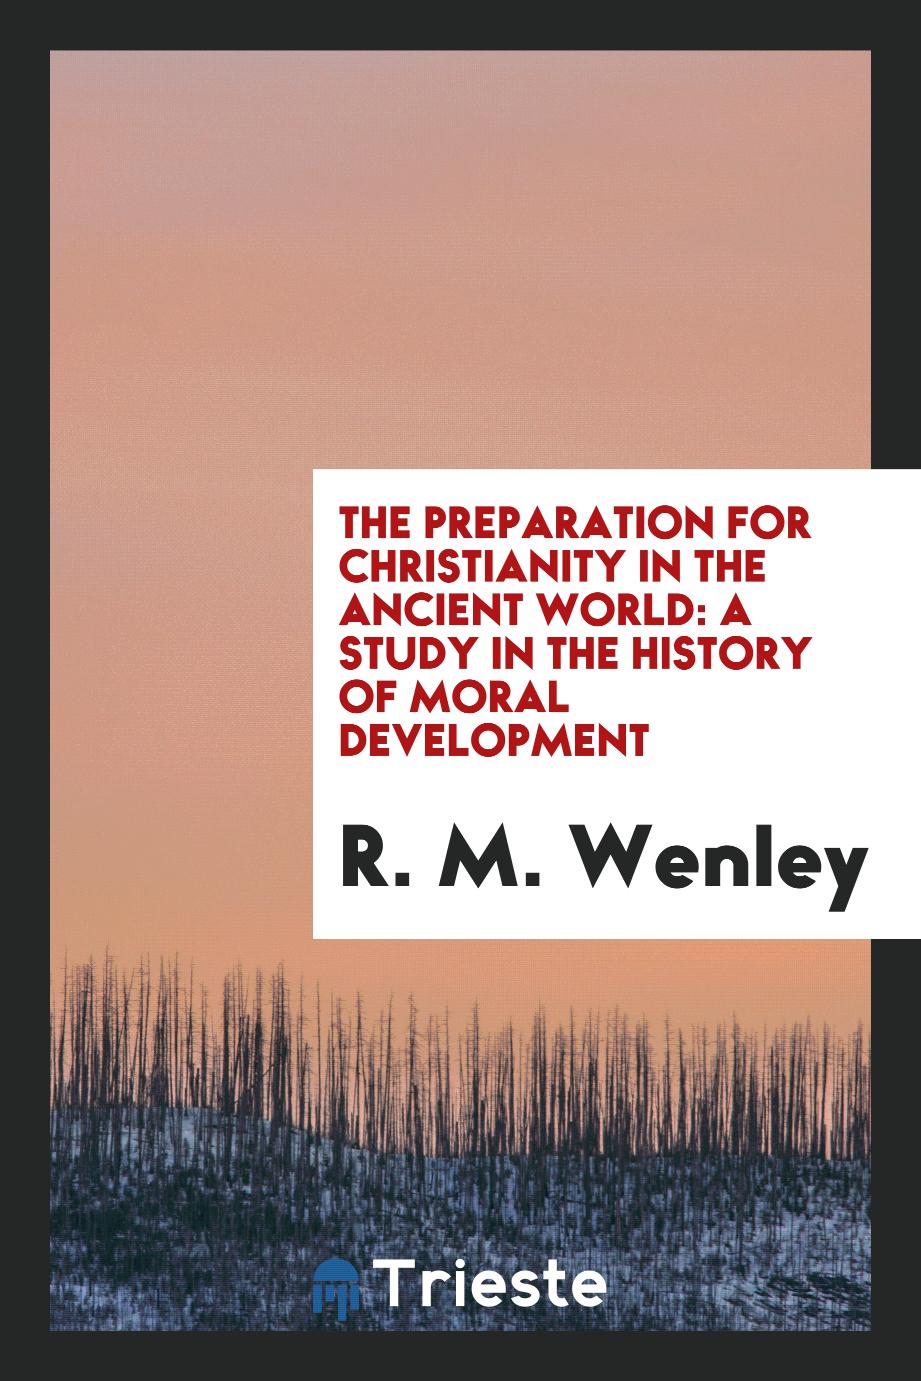 The preparation for Christianity in the ancient world: a study in the history of moral development